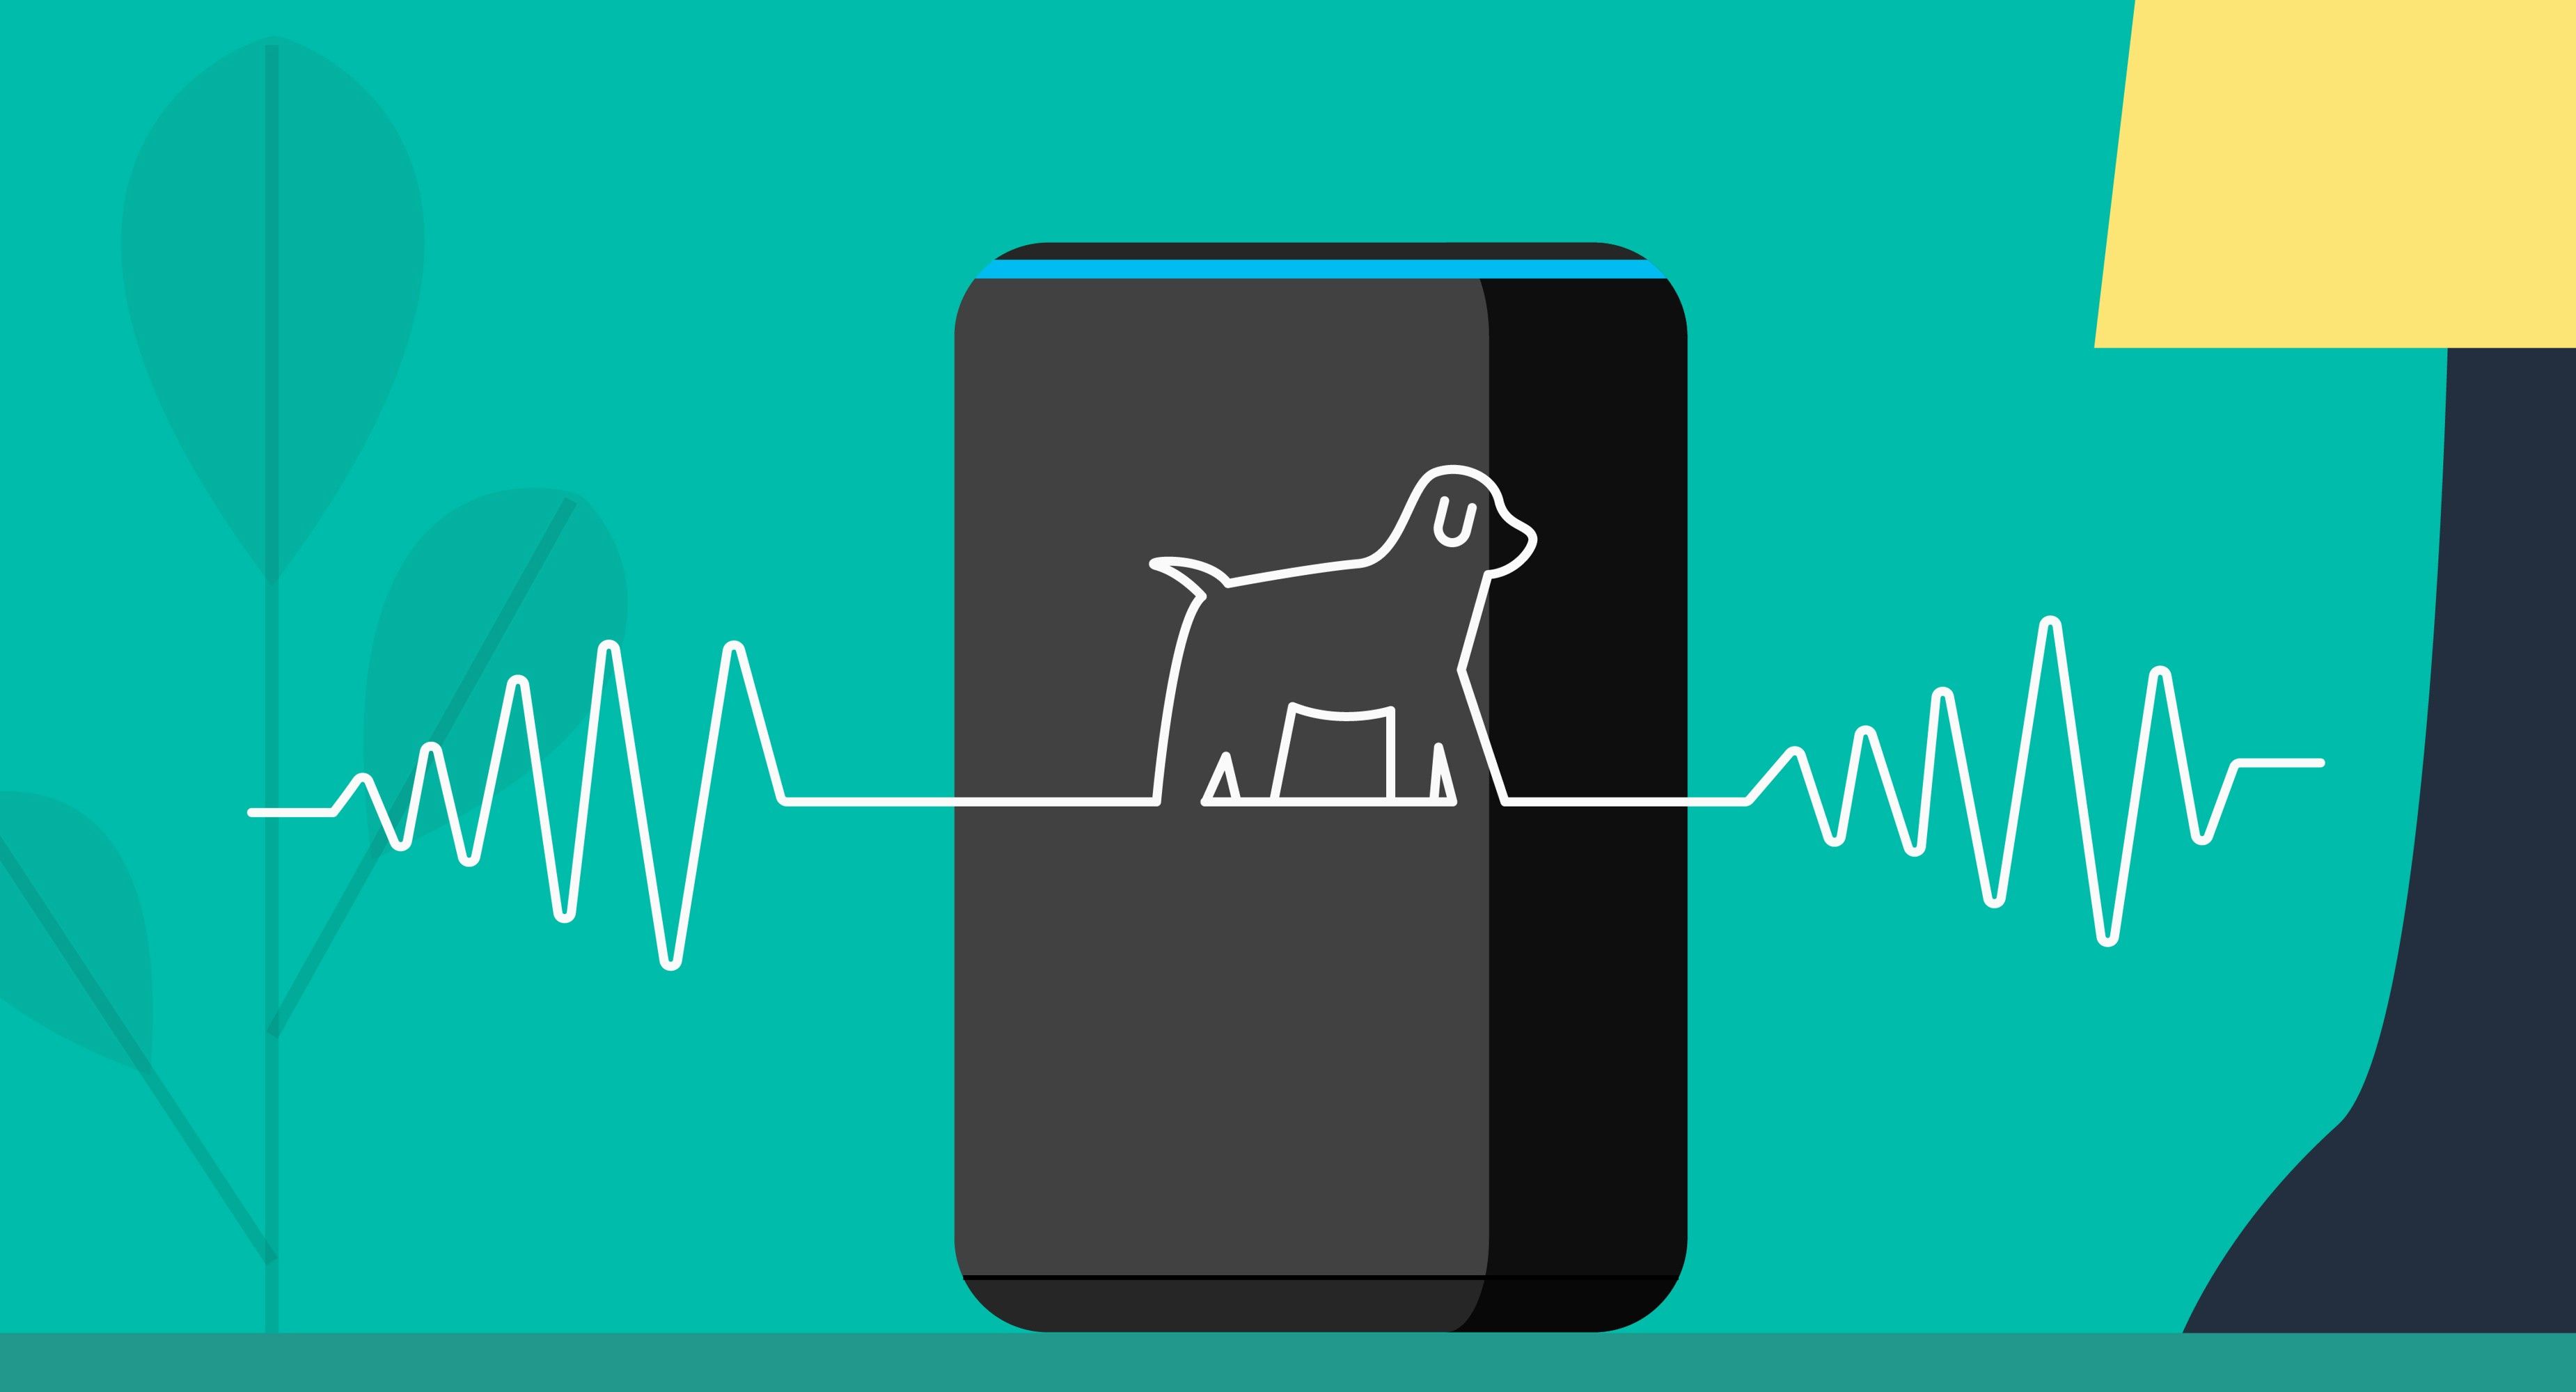 a vector image of an amazon echo is in the background over a field of green and there is a lineart image of a dog in a waveform over the top of the echo device